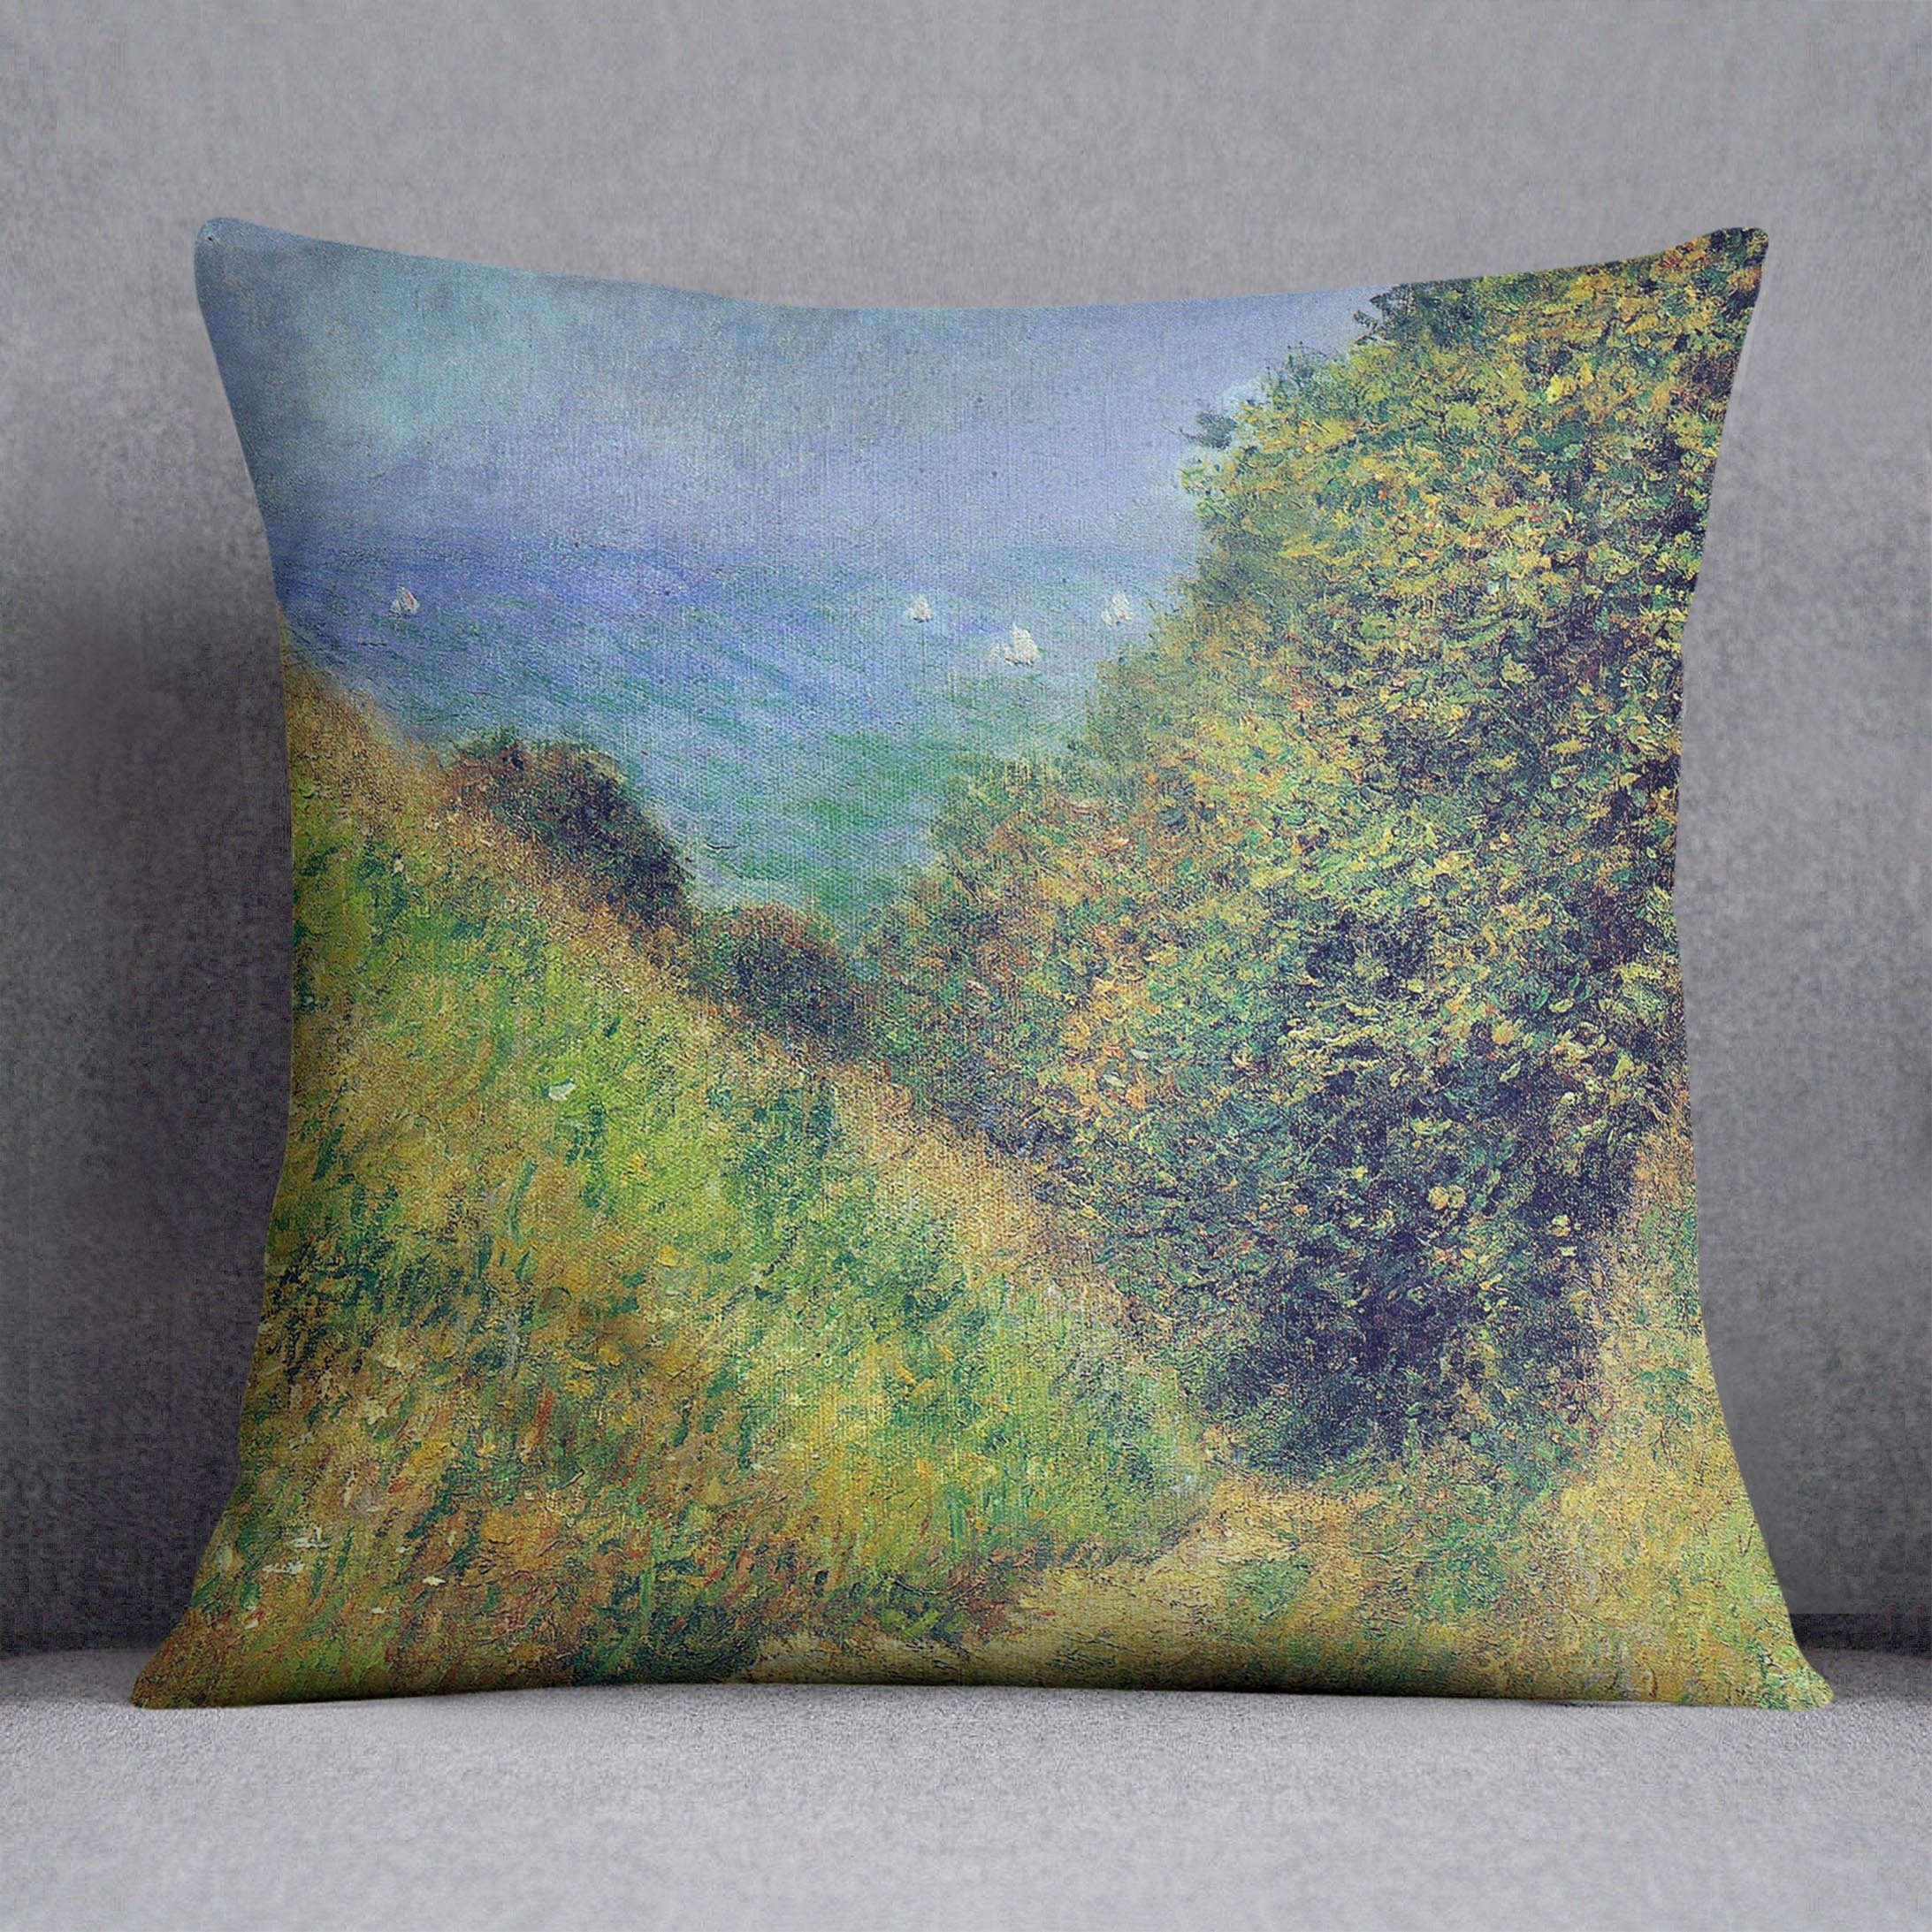 Pourville 2 by Monet Throw Pillow